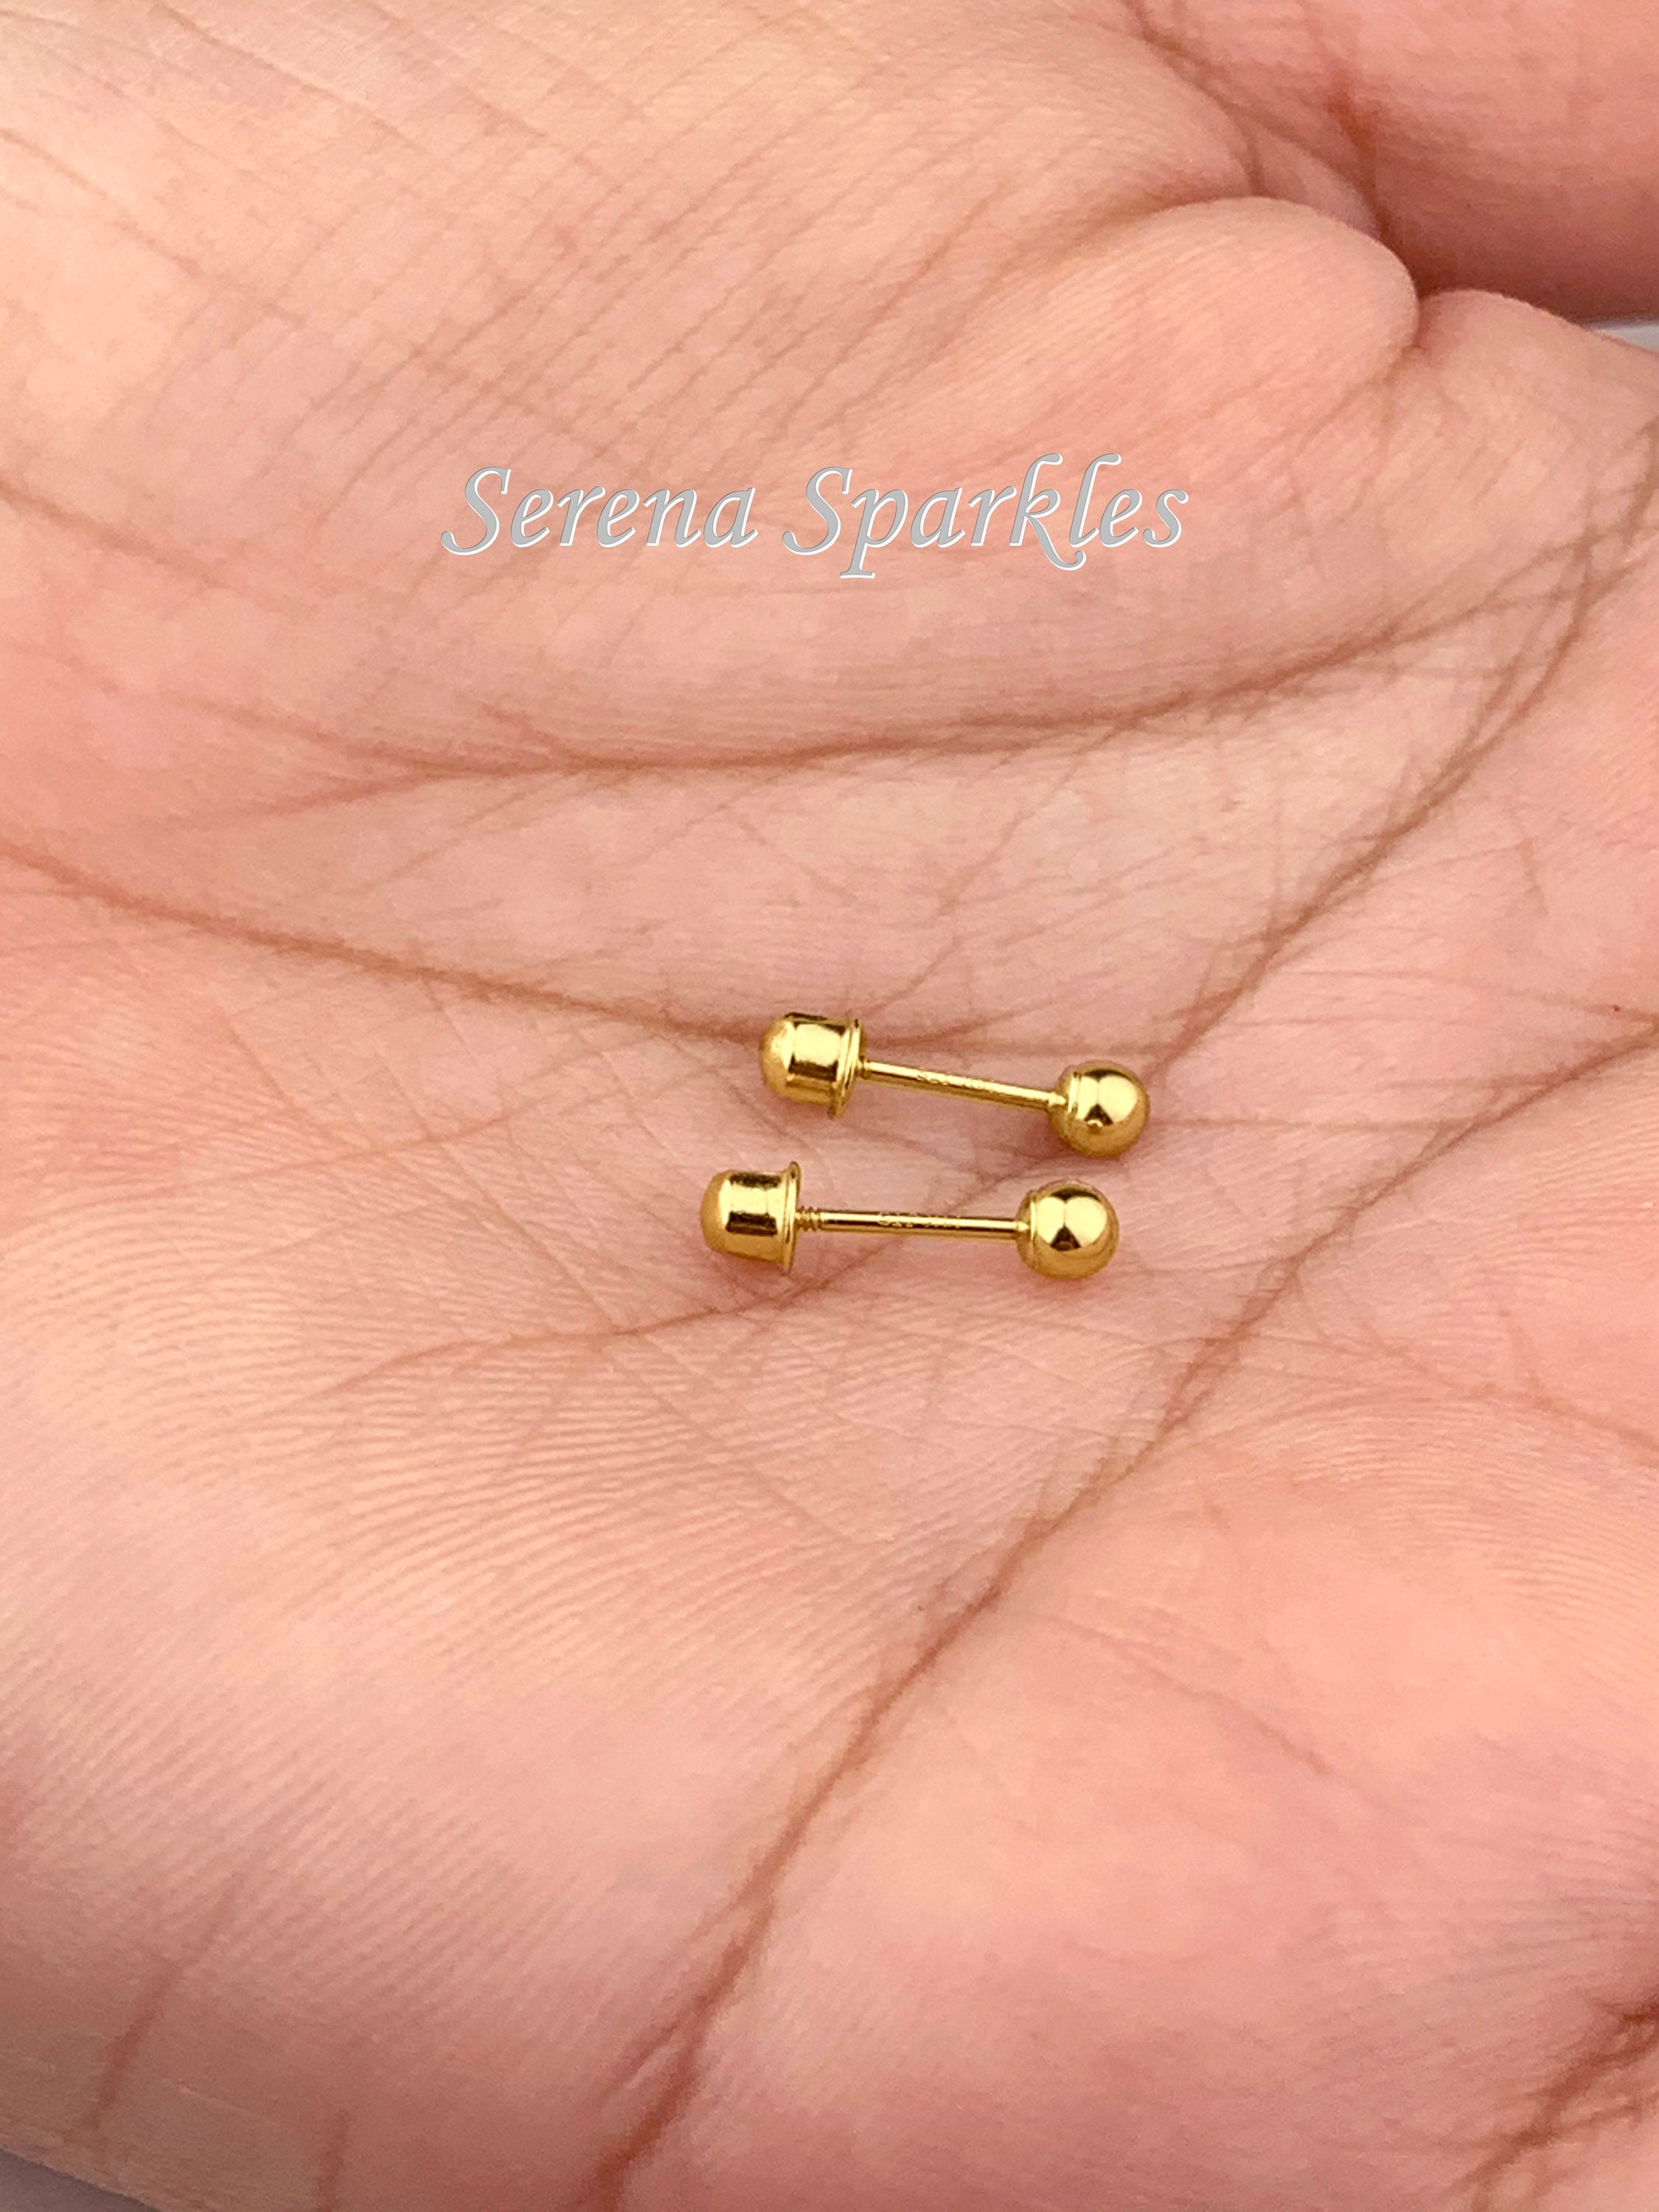 18K Yellow Gold Classic Ball Safety Screw Back Stud Earrings for Babies, Infants, Toddlers, and Little Girls 3mm-5mm - Traditional Plain Ball 18K